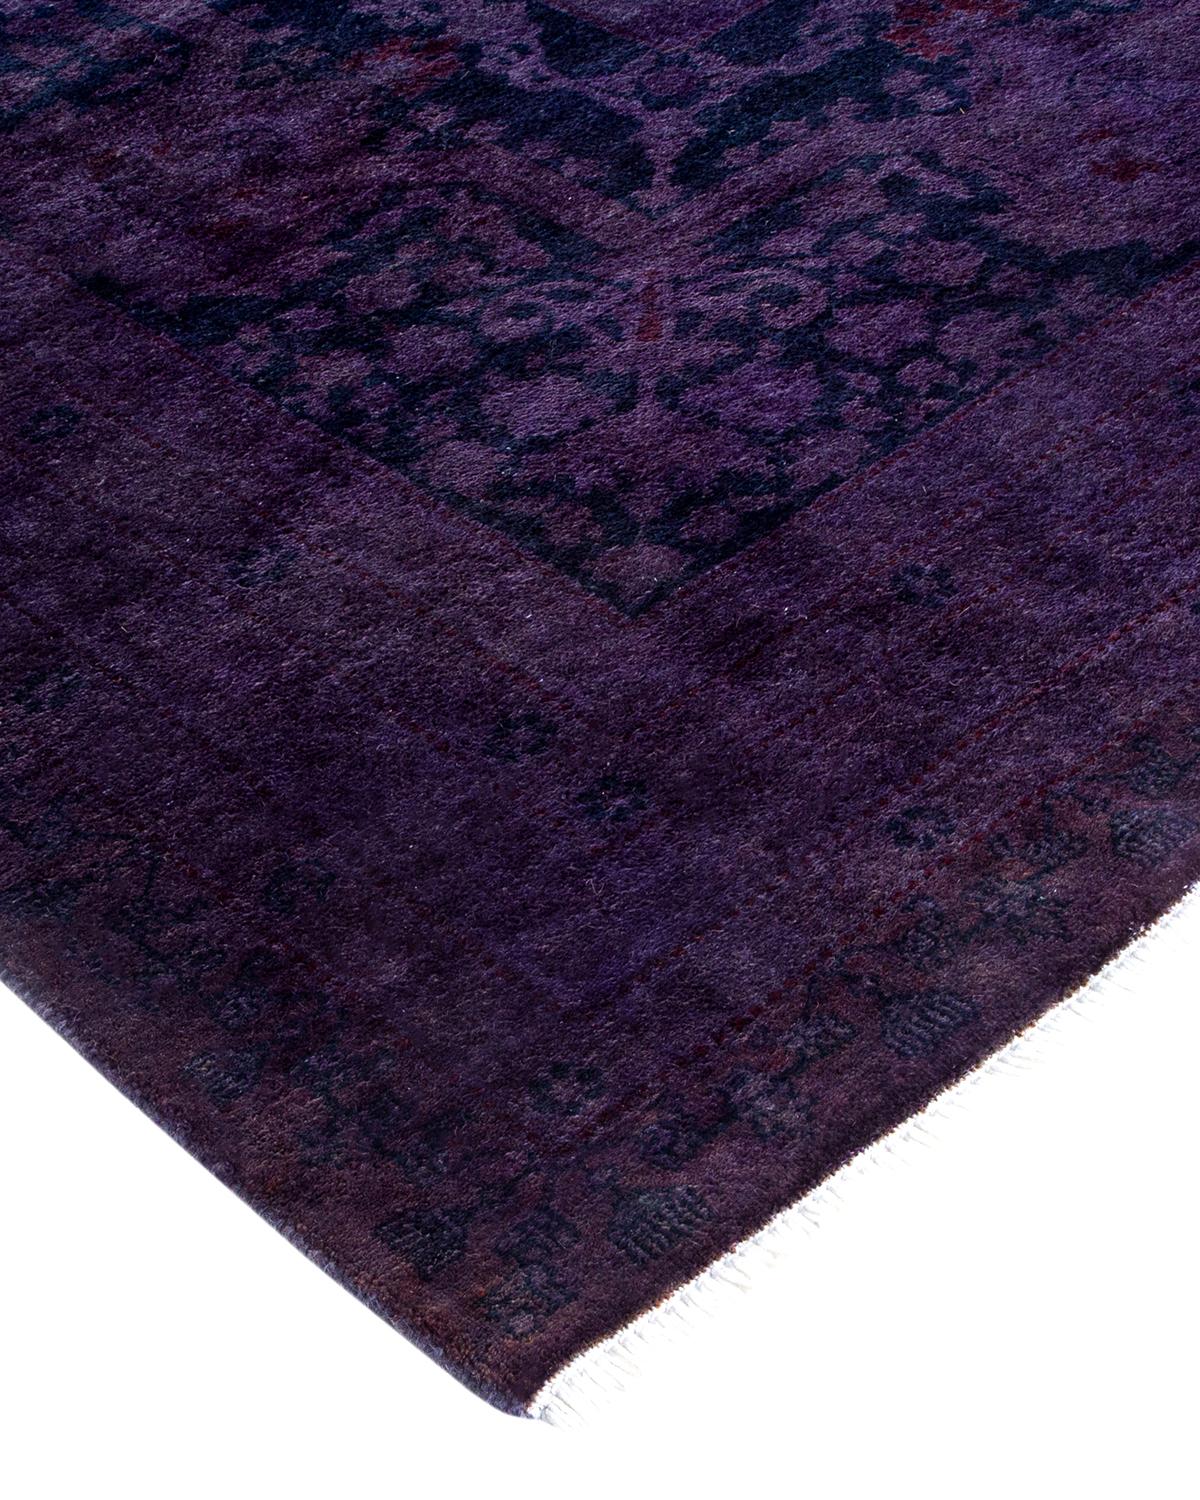 Vibrance rugs epitomize classic with a twist: traditional patterns overdyed in brilliant color. Each hand-knotted rug is washed in a 100%-natural botanical dye that reveals hidden nuances in the designs. These are rugs that transcend trends, and